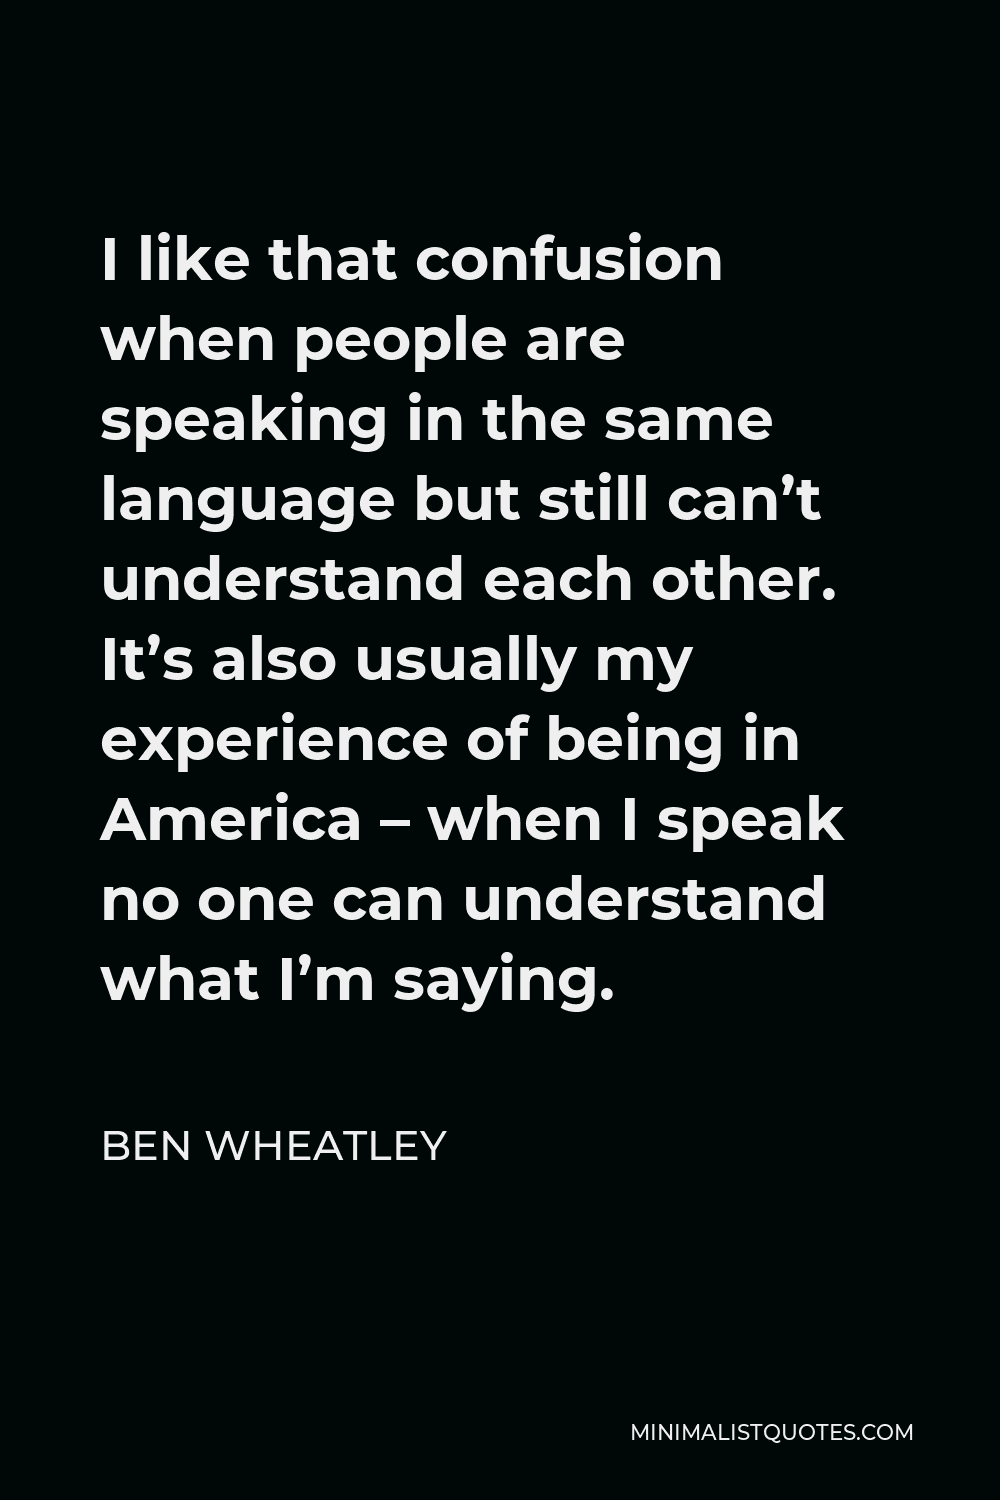 Ben Wheatley Quote - I like that confusion when people are speaking in the same language but still can’t understand each other. It’s also usually my experience of being in America – when I speak no one can understand what I’m saying.